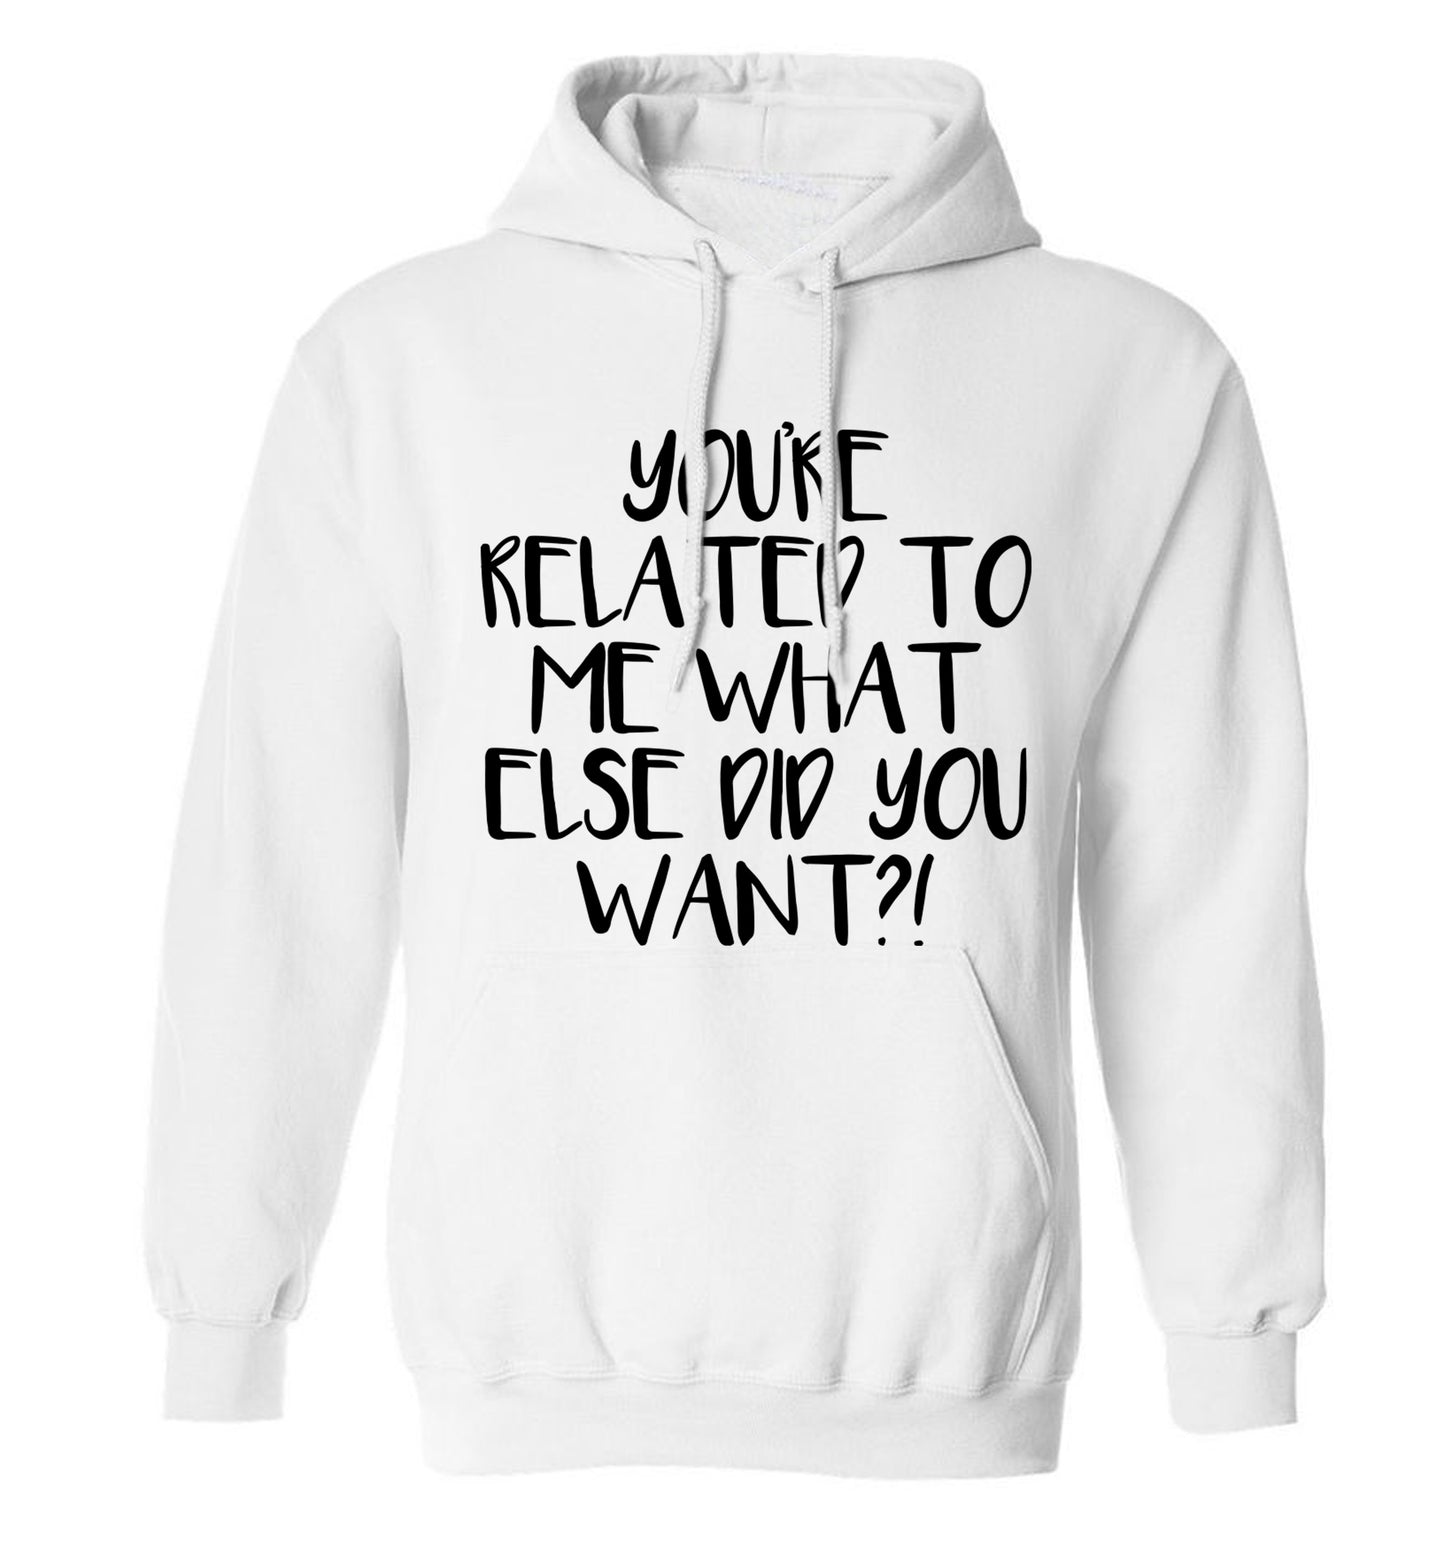 You're related to me what more do you want? adults unisex white hoodie 2XL